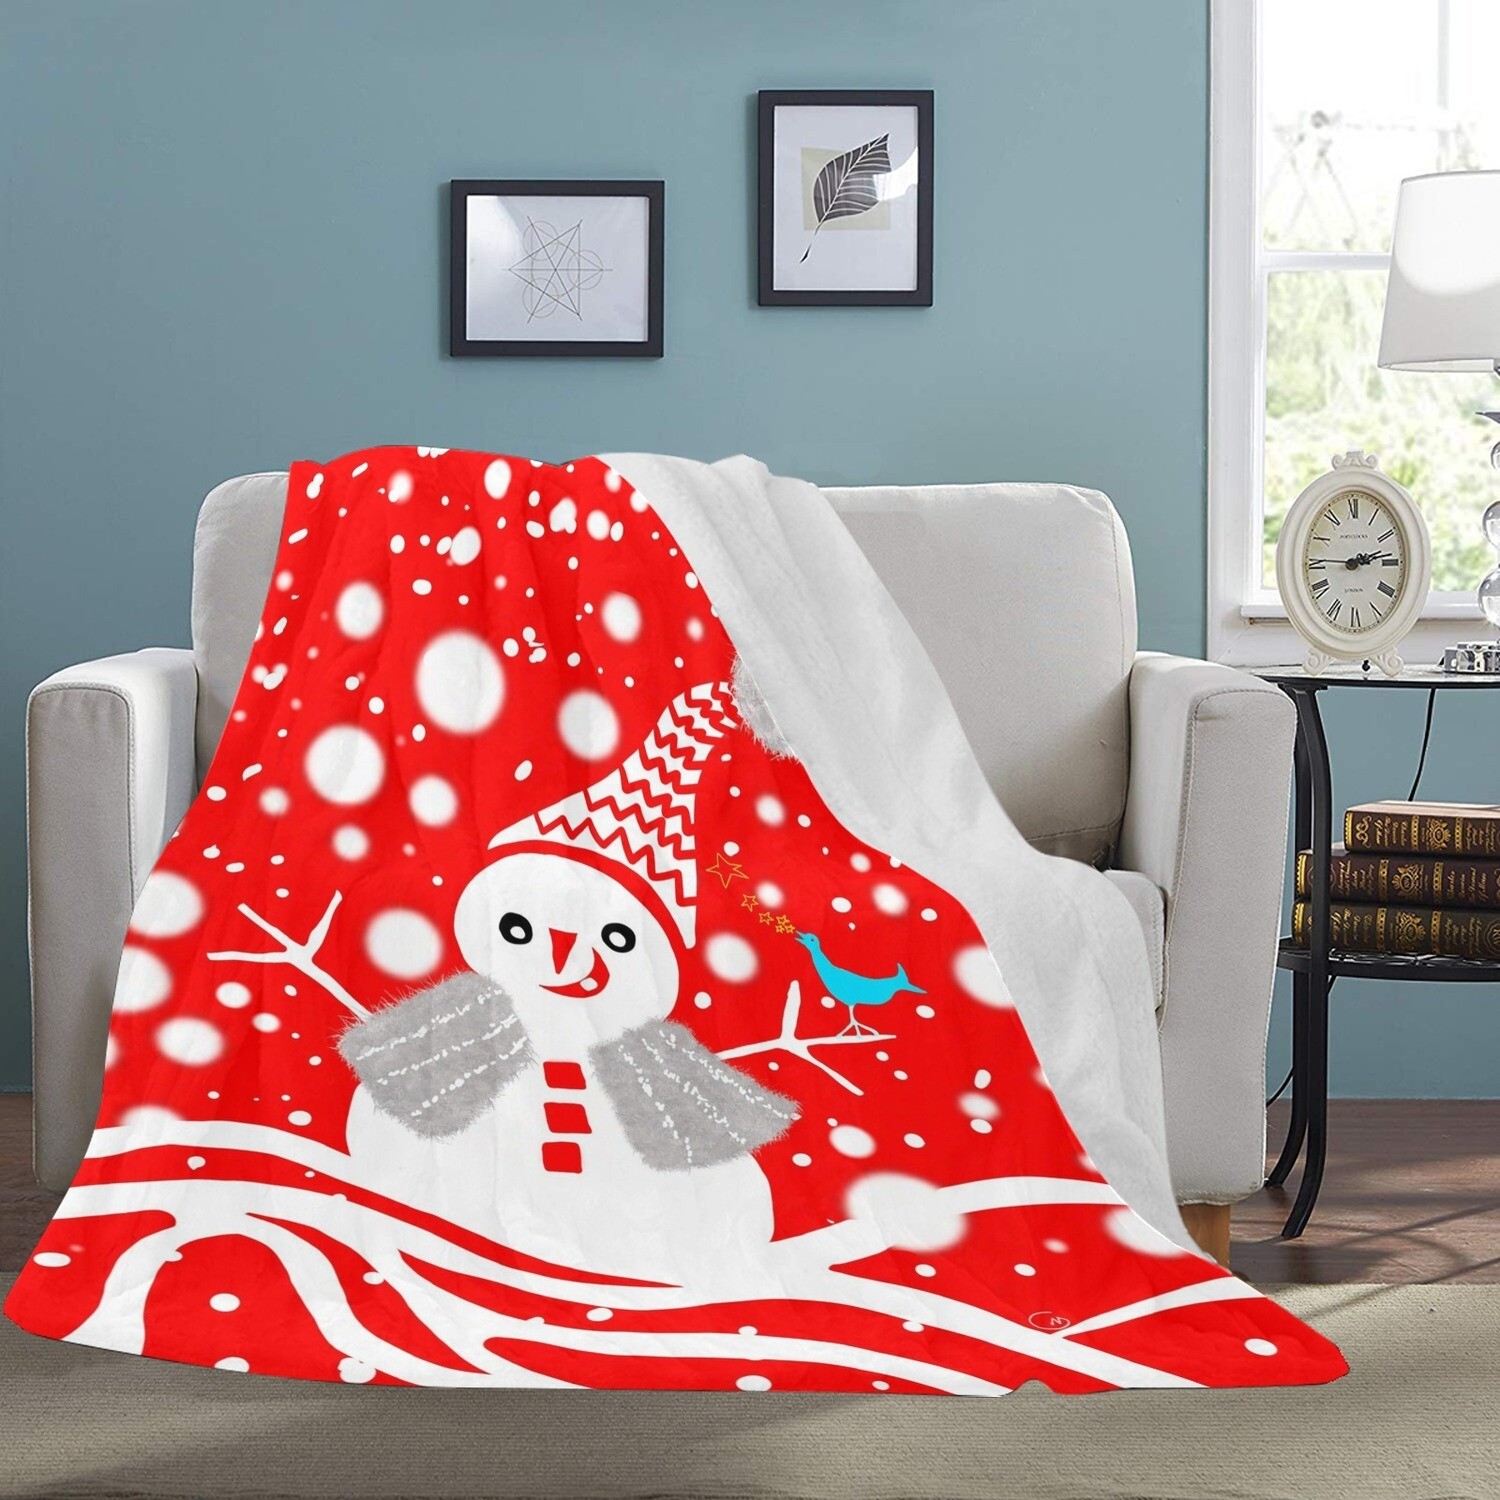 🤴🏽👸🏽☃️Large Ultra-Soft Micro Fleece Blanket Snowman and his blue bird by Maru, gift, gift for her, gift for him, gift for them, 70"x80", red